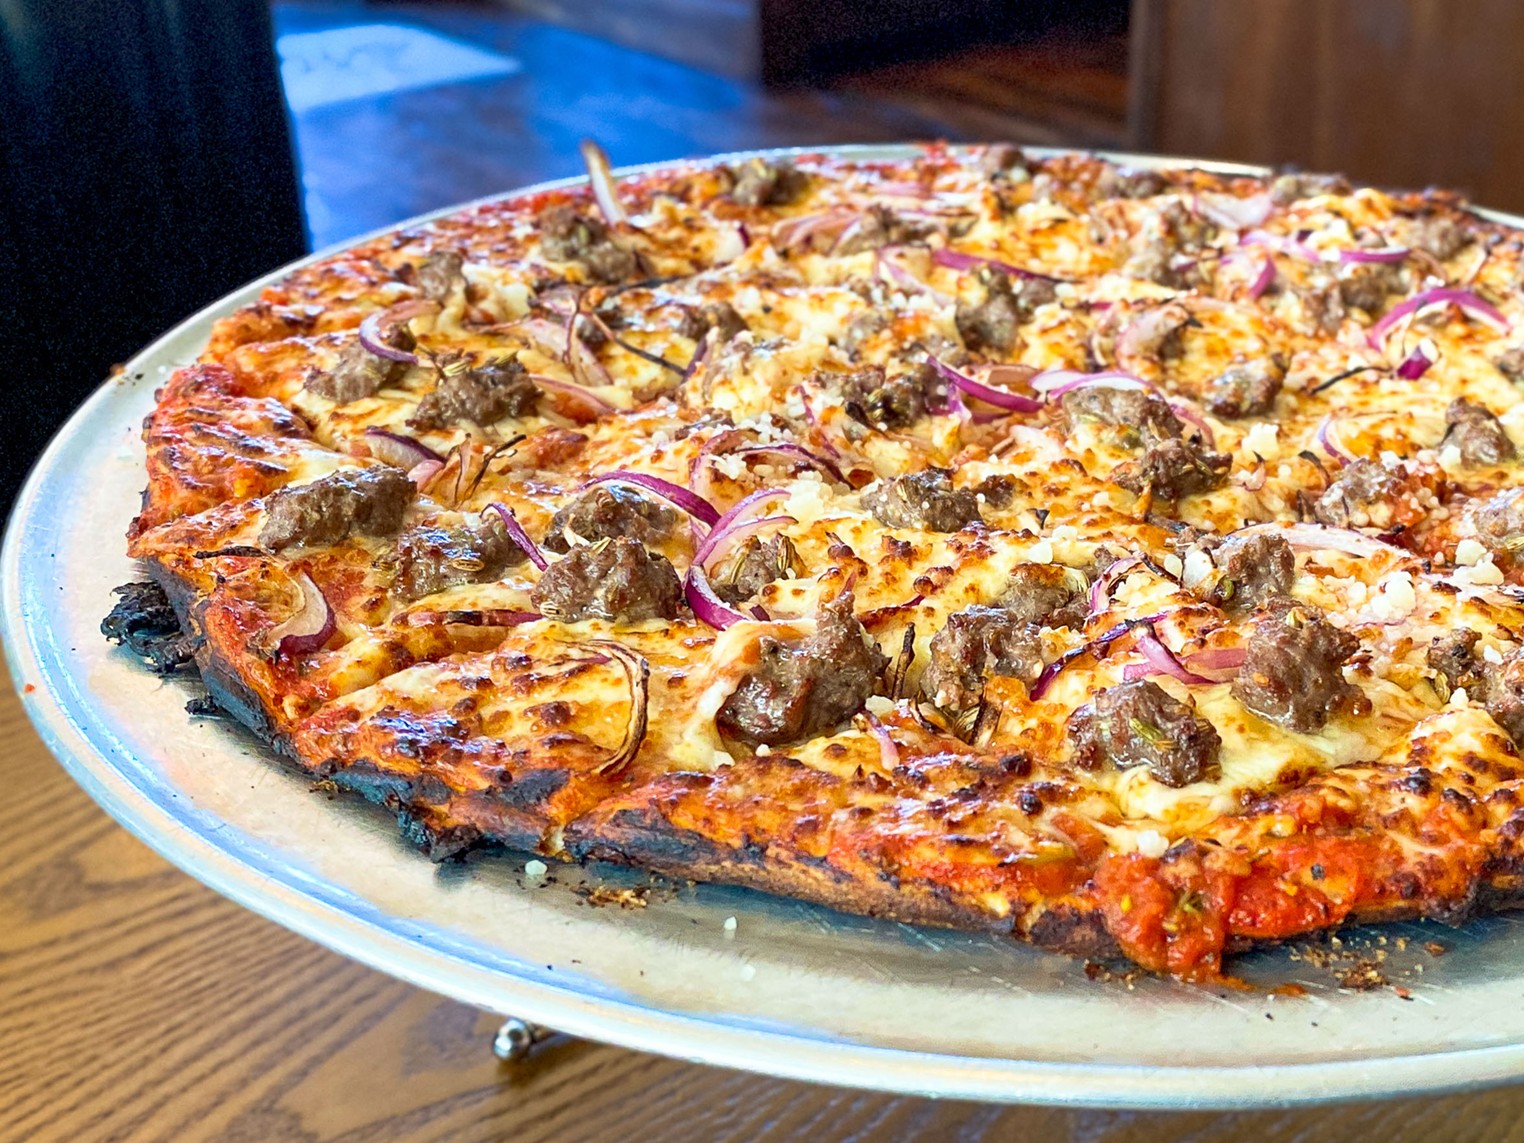 Which pizza place in Dallas does ChatGPT like best?